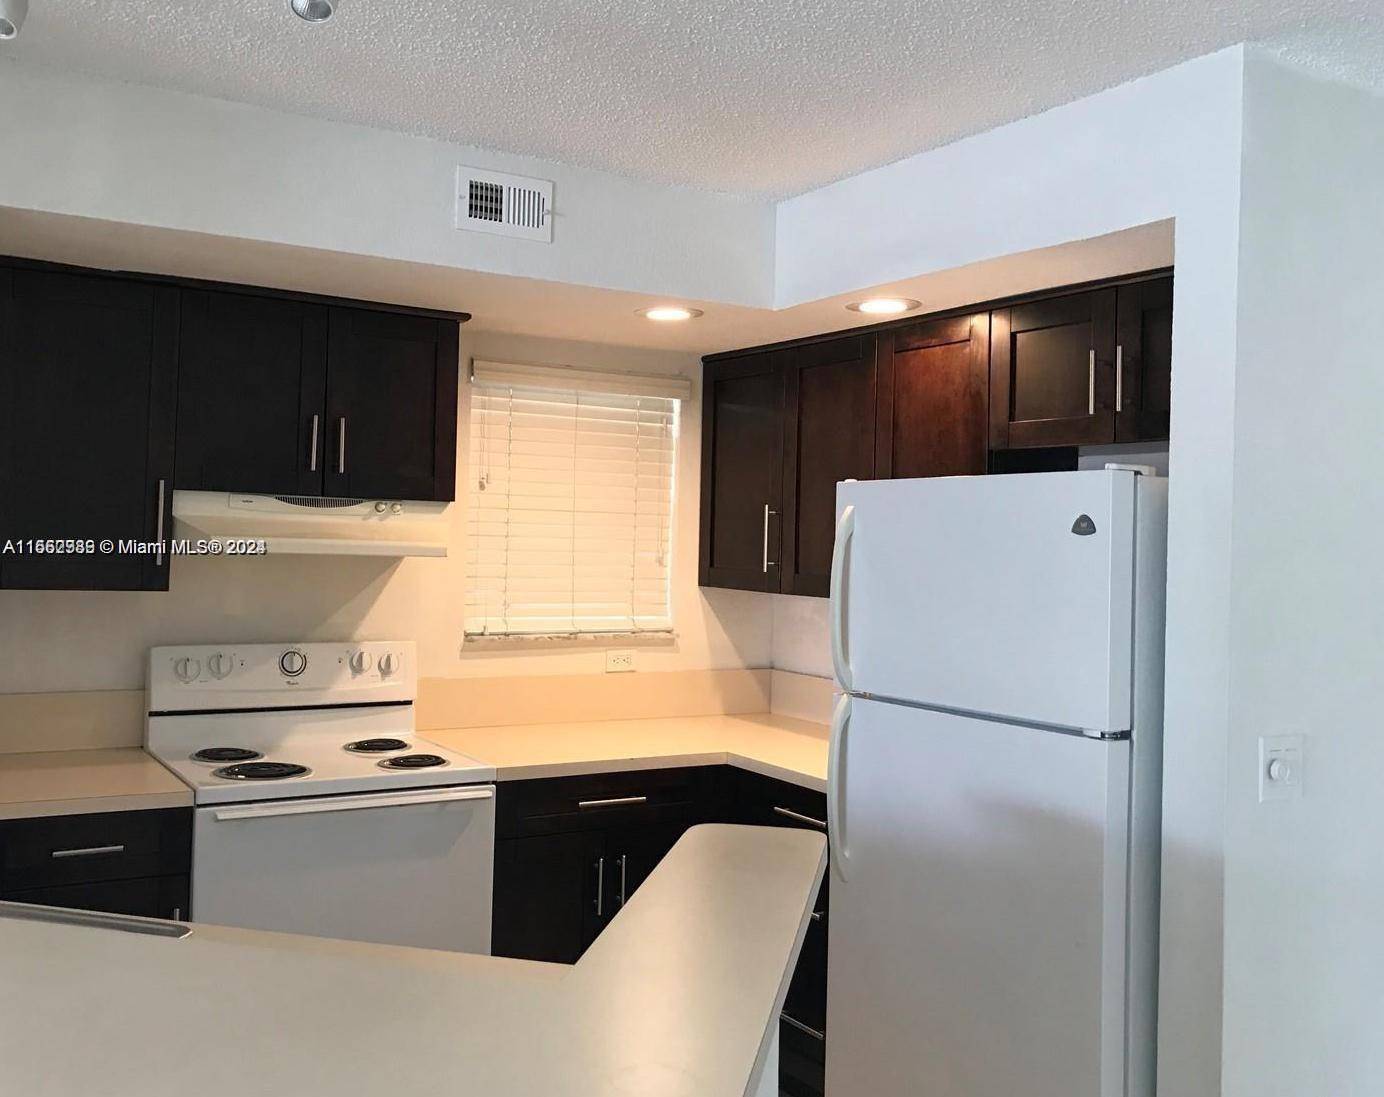 Largest 2 master bedrooms and bathroom with update vanities, walking closets, upgrade kitchen, extra linen closet and or deposit, washer and dryer inside the unit.